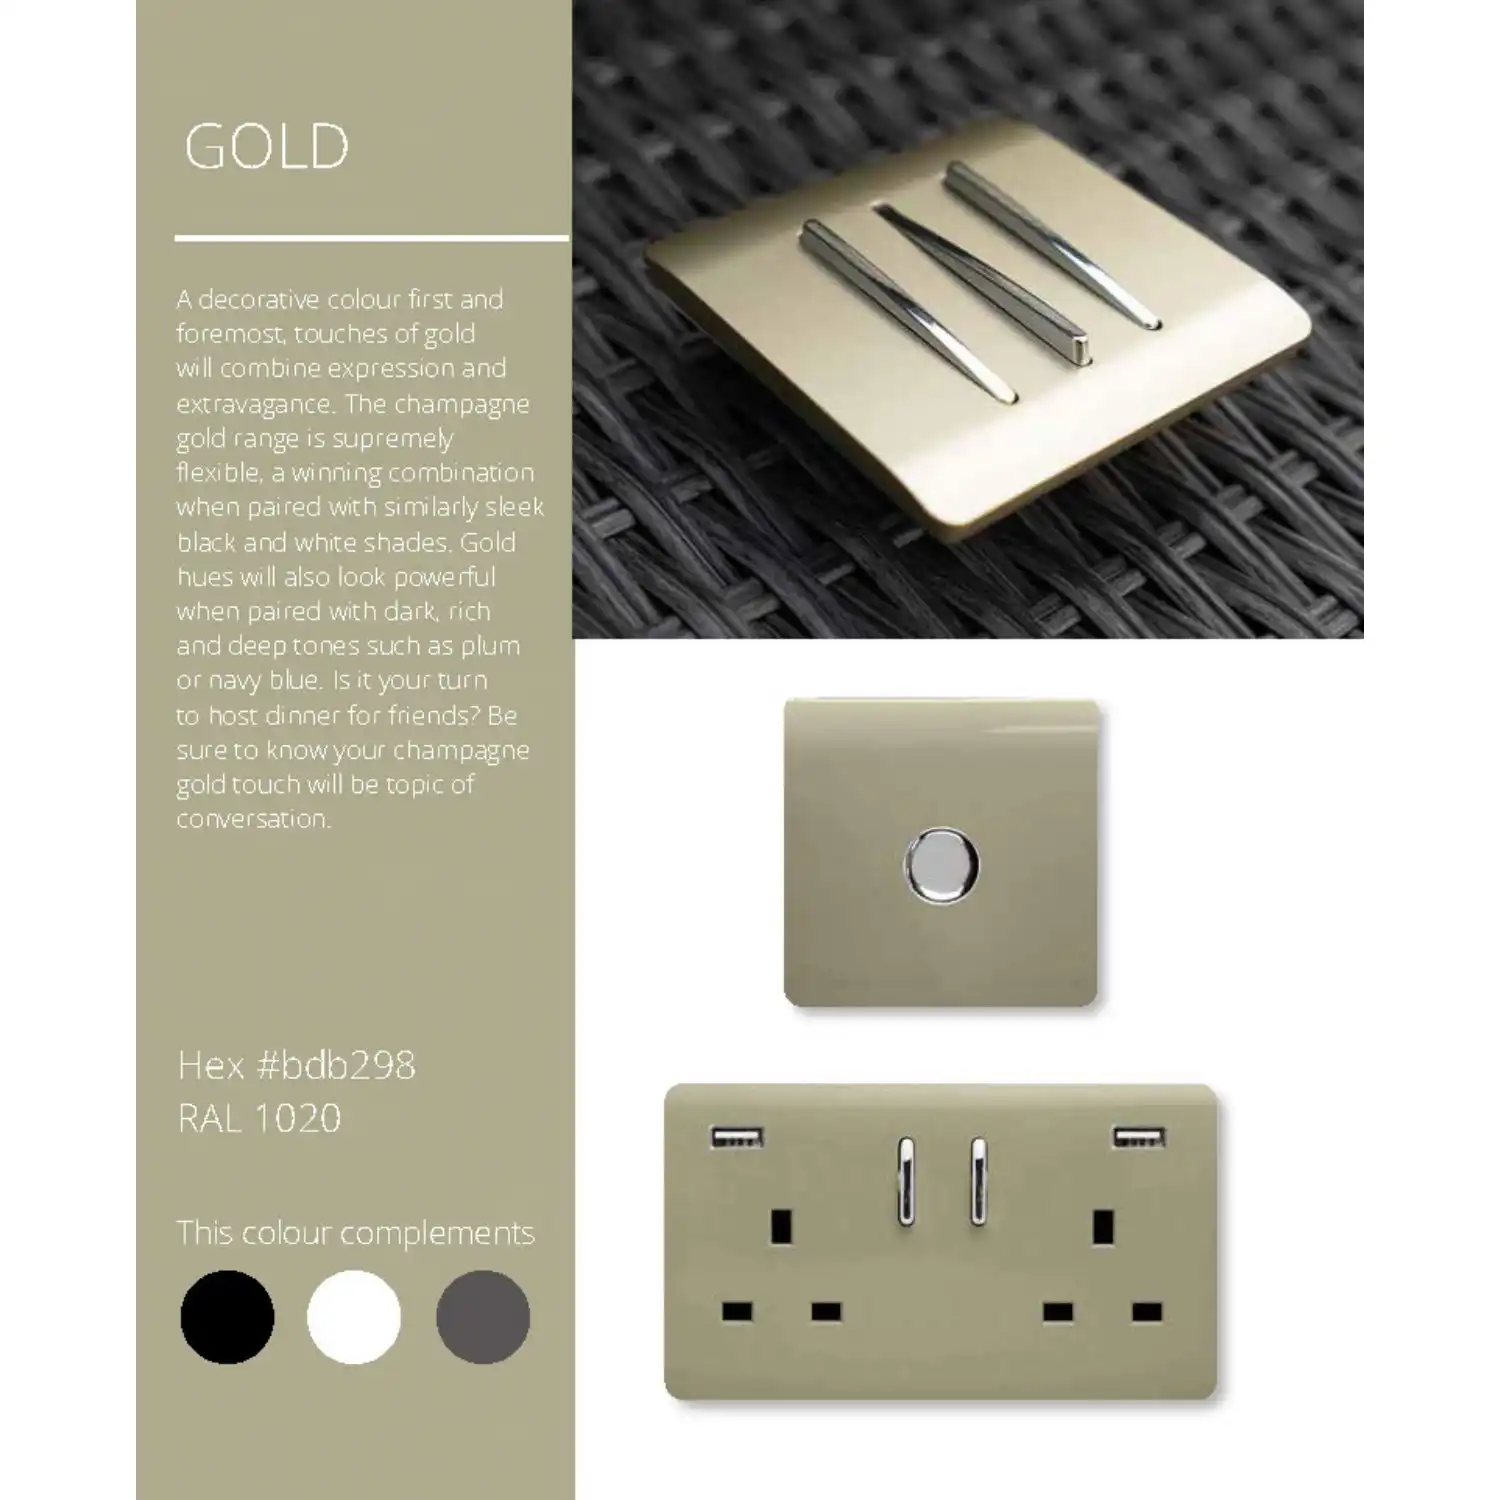 Trendi, Artistic Modern Switch Fused Spur 13A With Flex Outlet Champagne Gold Finish, BRITISH MADE, (35mm Back Box Required), 5yrs Warranty